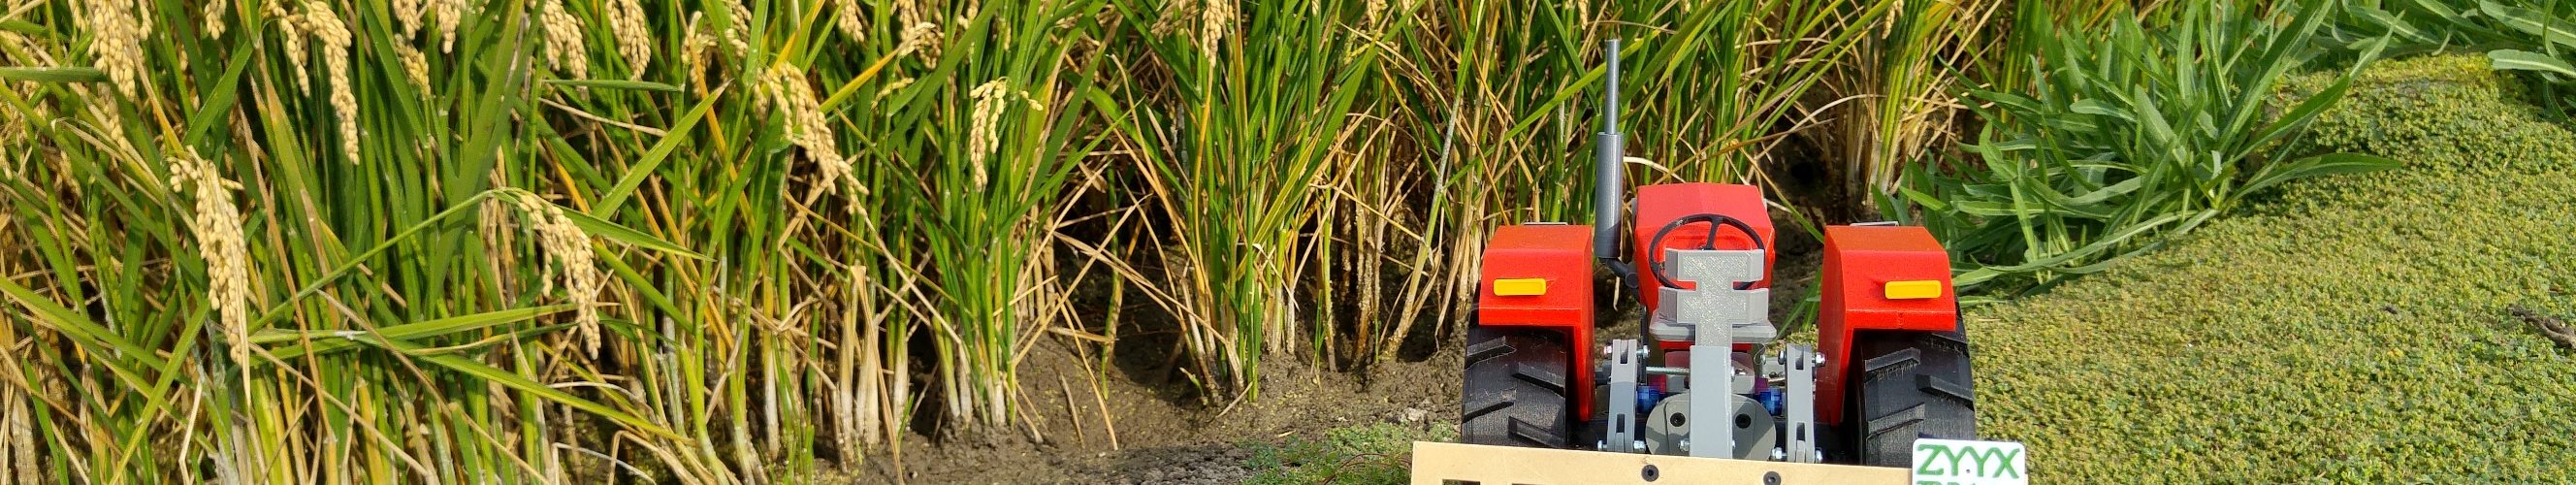 openrc-tractor-release-back-rice-rake